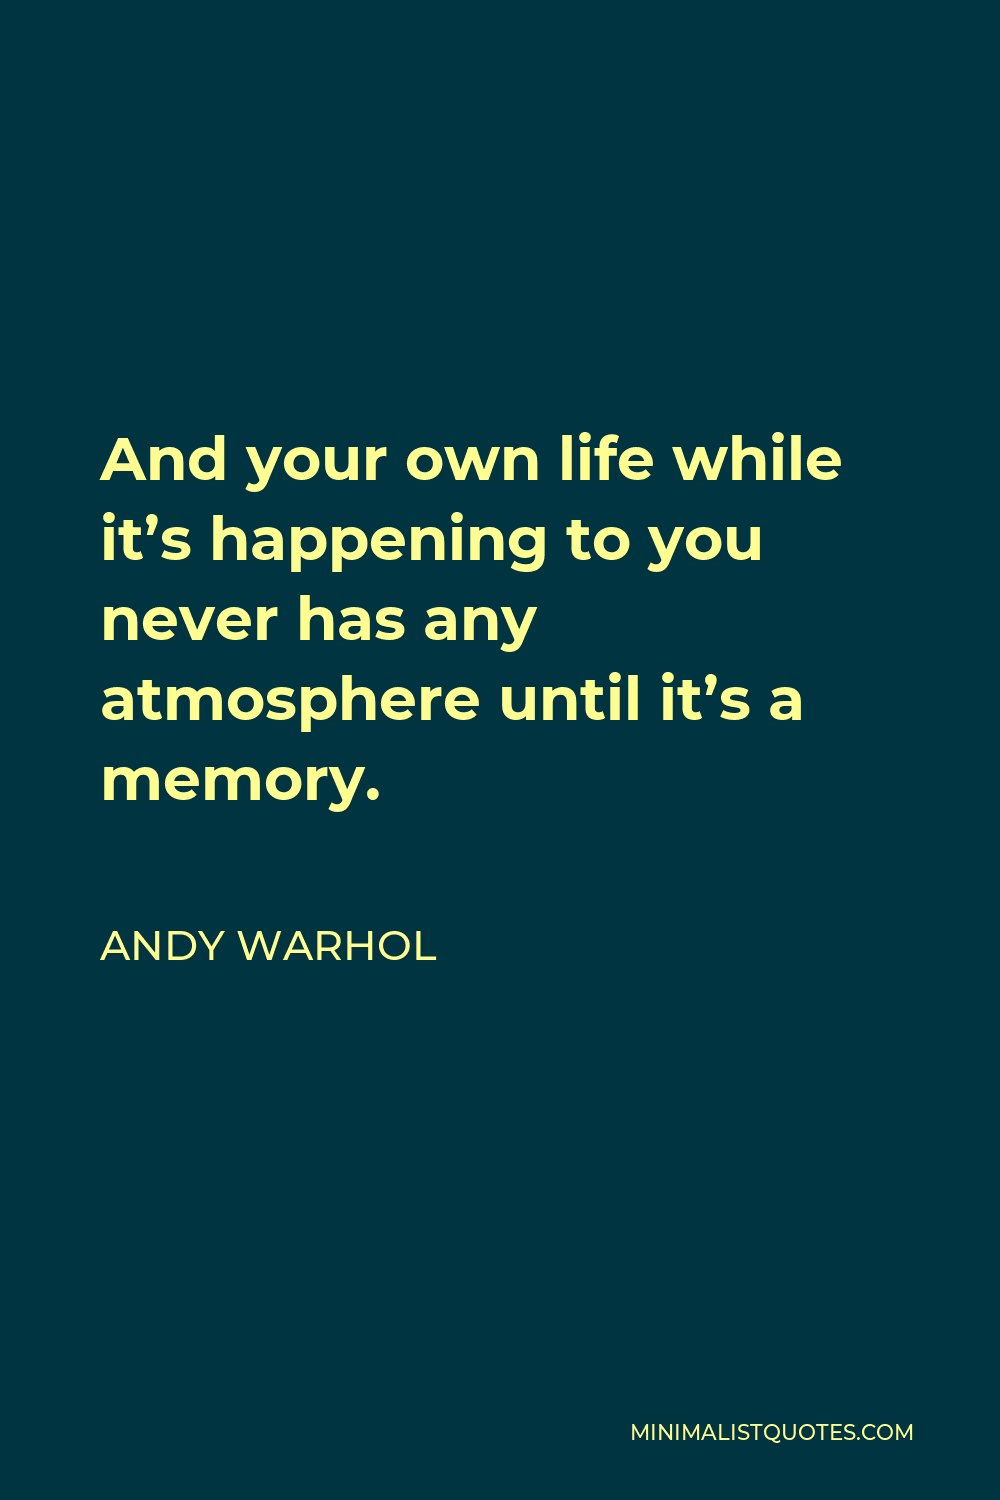 Andy Warhol Quote - And your own life while it’s happening to you never has any atmosphere until it’s a memory.